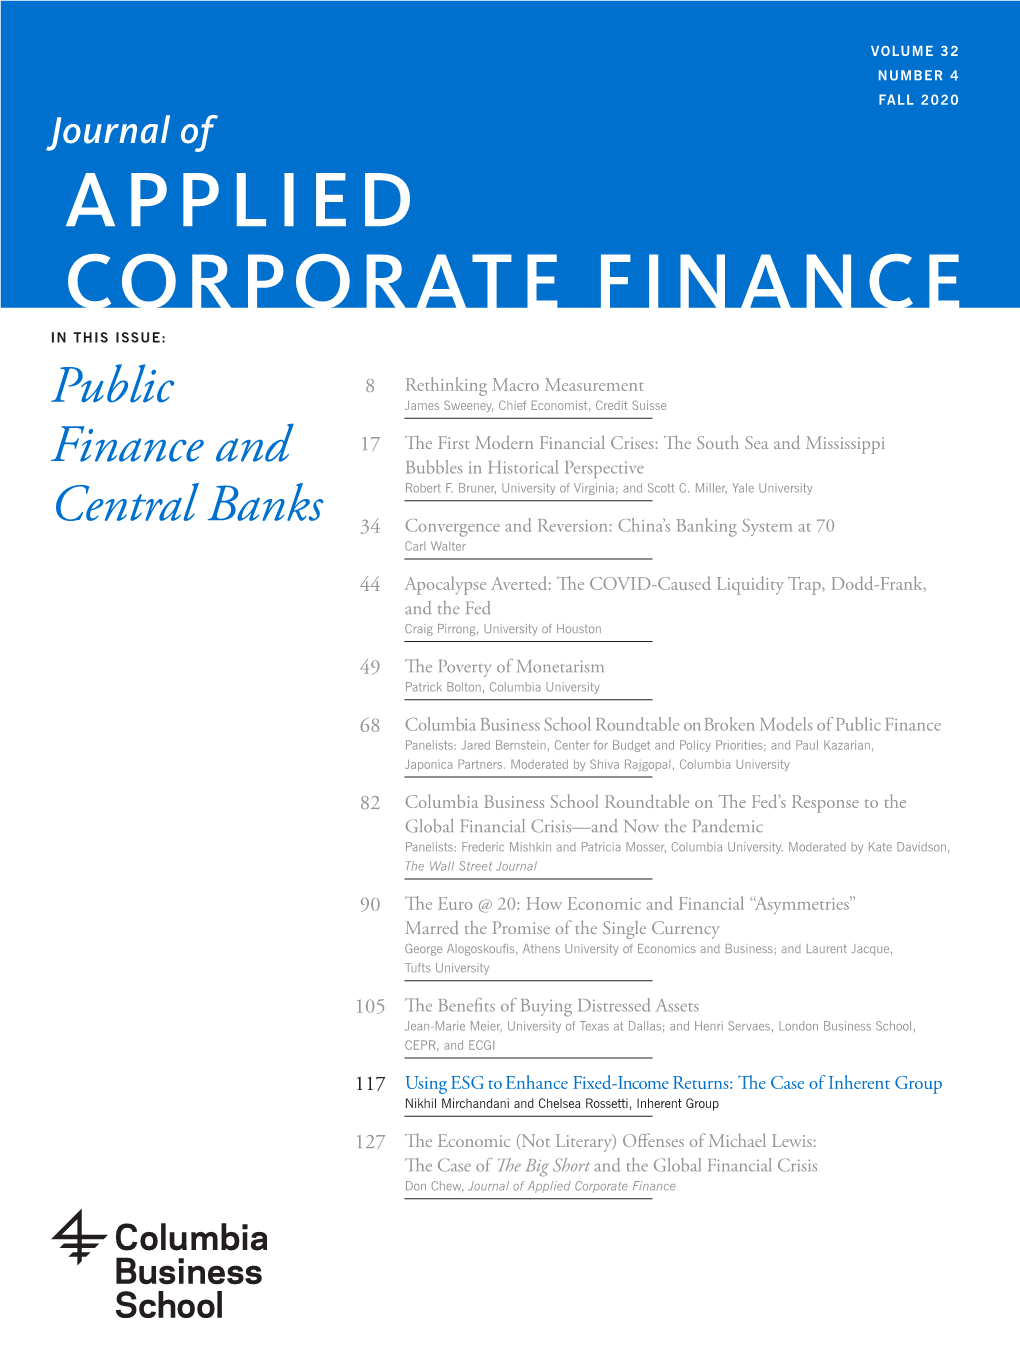 Applied Corporate Finance in This Issue